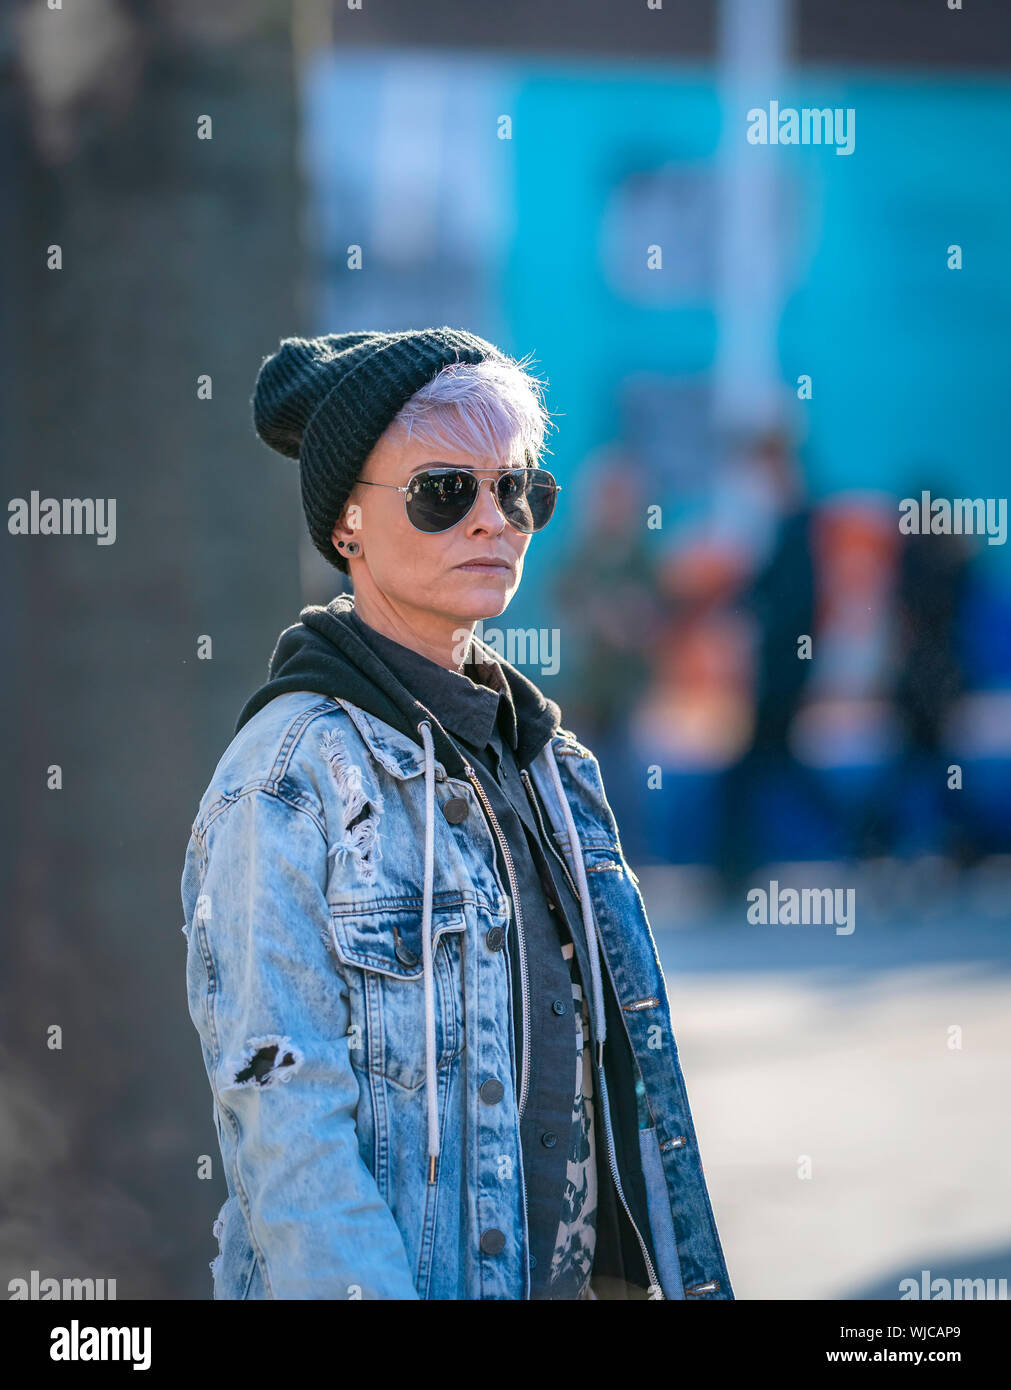 Portrait of a woman wearing sunglasses and a hat, Menningarnott or Cultural day, Reykjavik, Iceland. Stock Photo